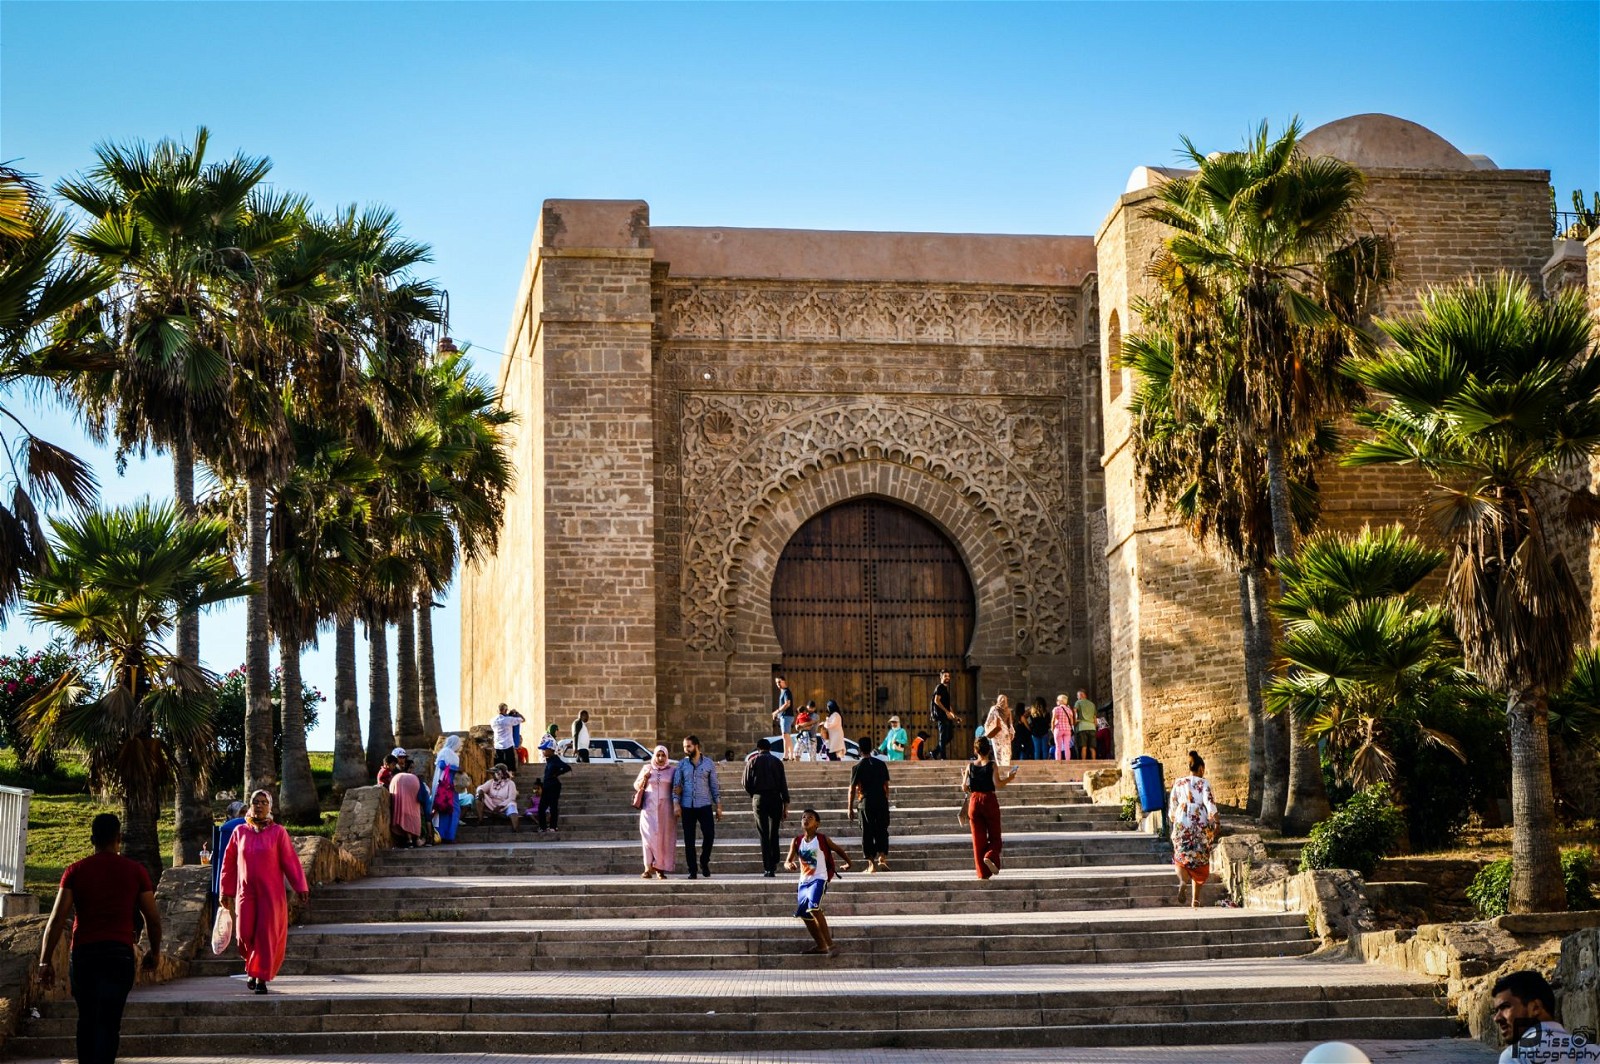 Morocco's history is equally rich and fascinating. The country has been home to various civilizations, including the Phoenicians, Romans, Arabs, Berbers, and French, all of whom have left their imprints on Morocco's architecture,